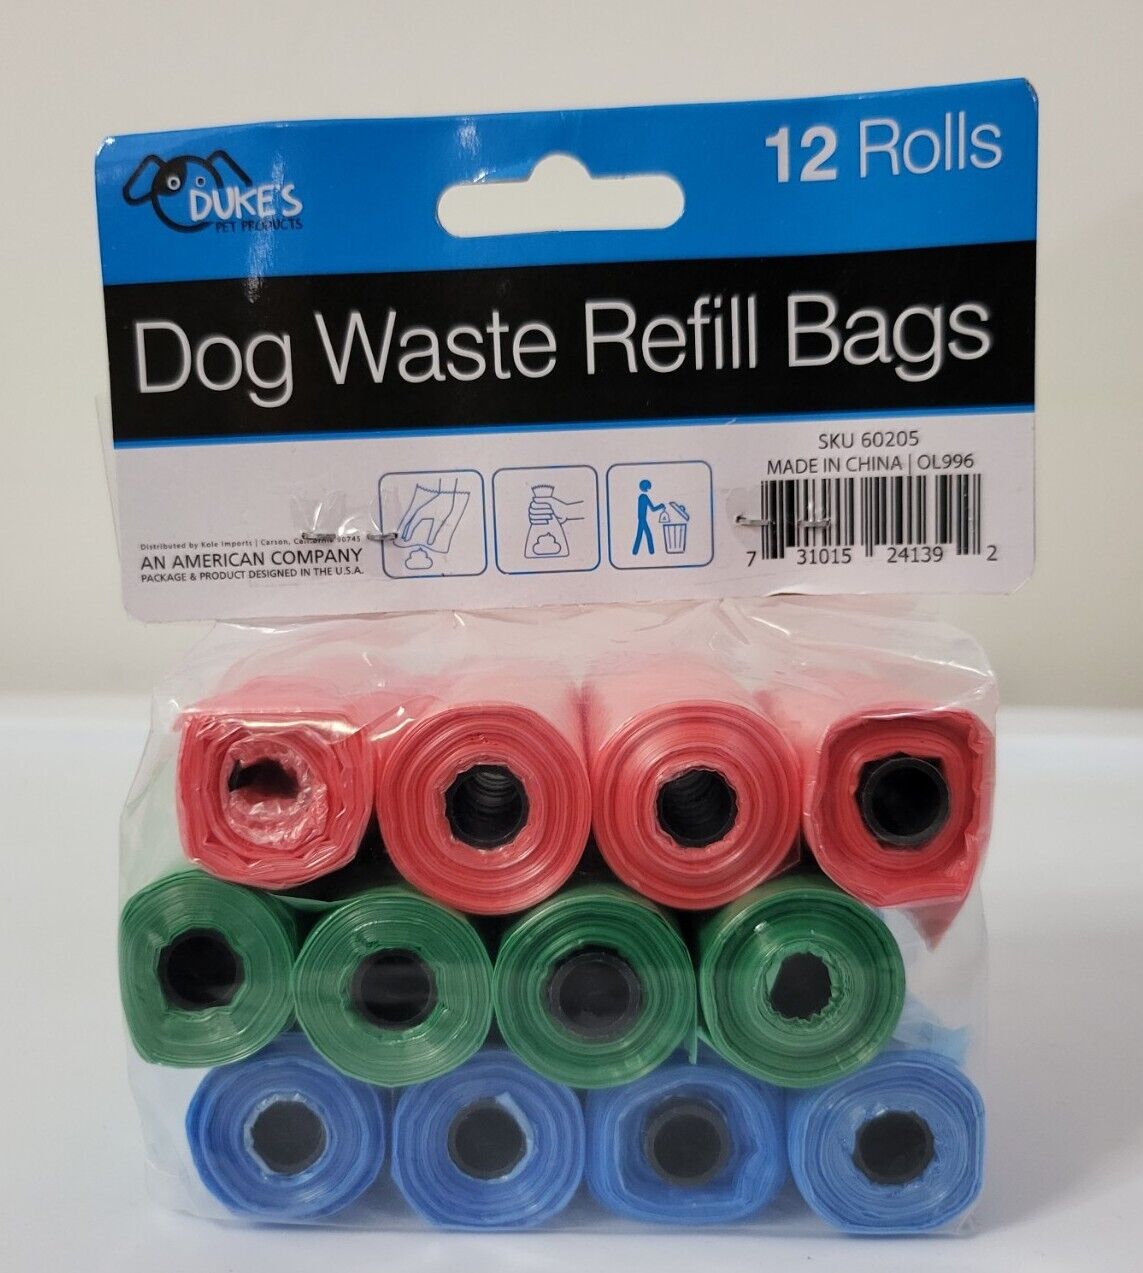 Pet Dog Waste Refill Bags 12 Rolls 3 colors 15 bags per Roll - Ricky's Garage